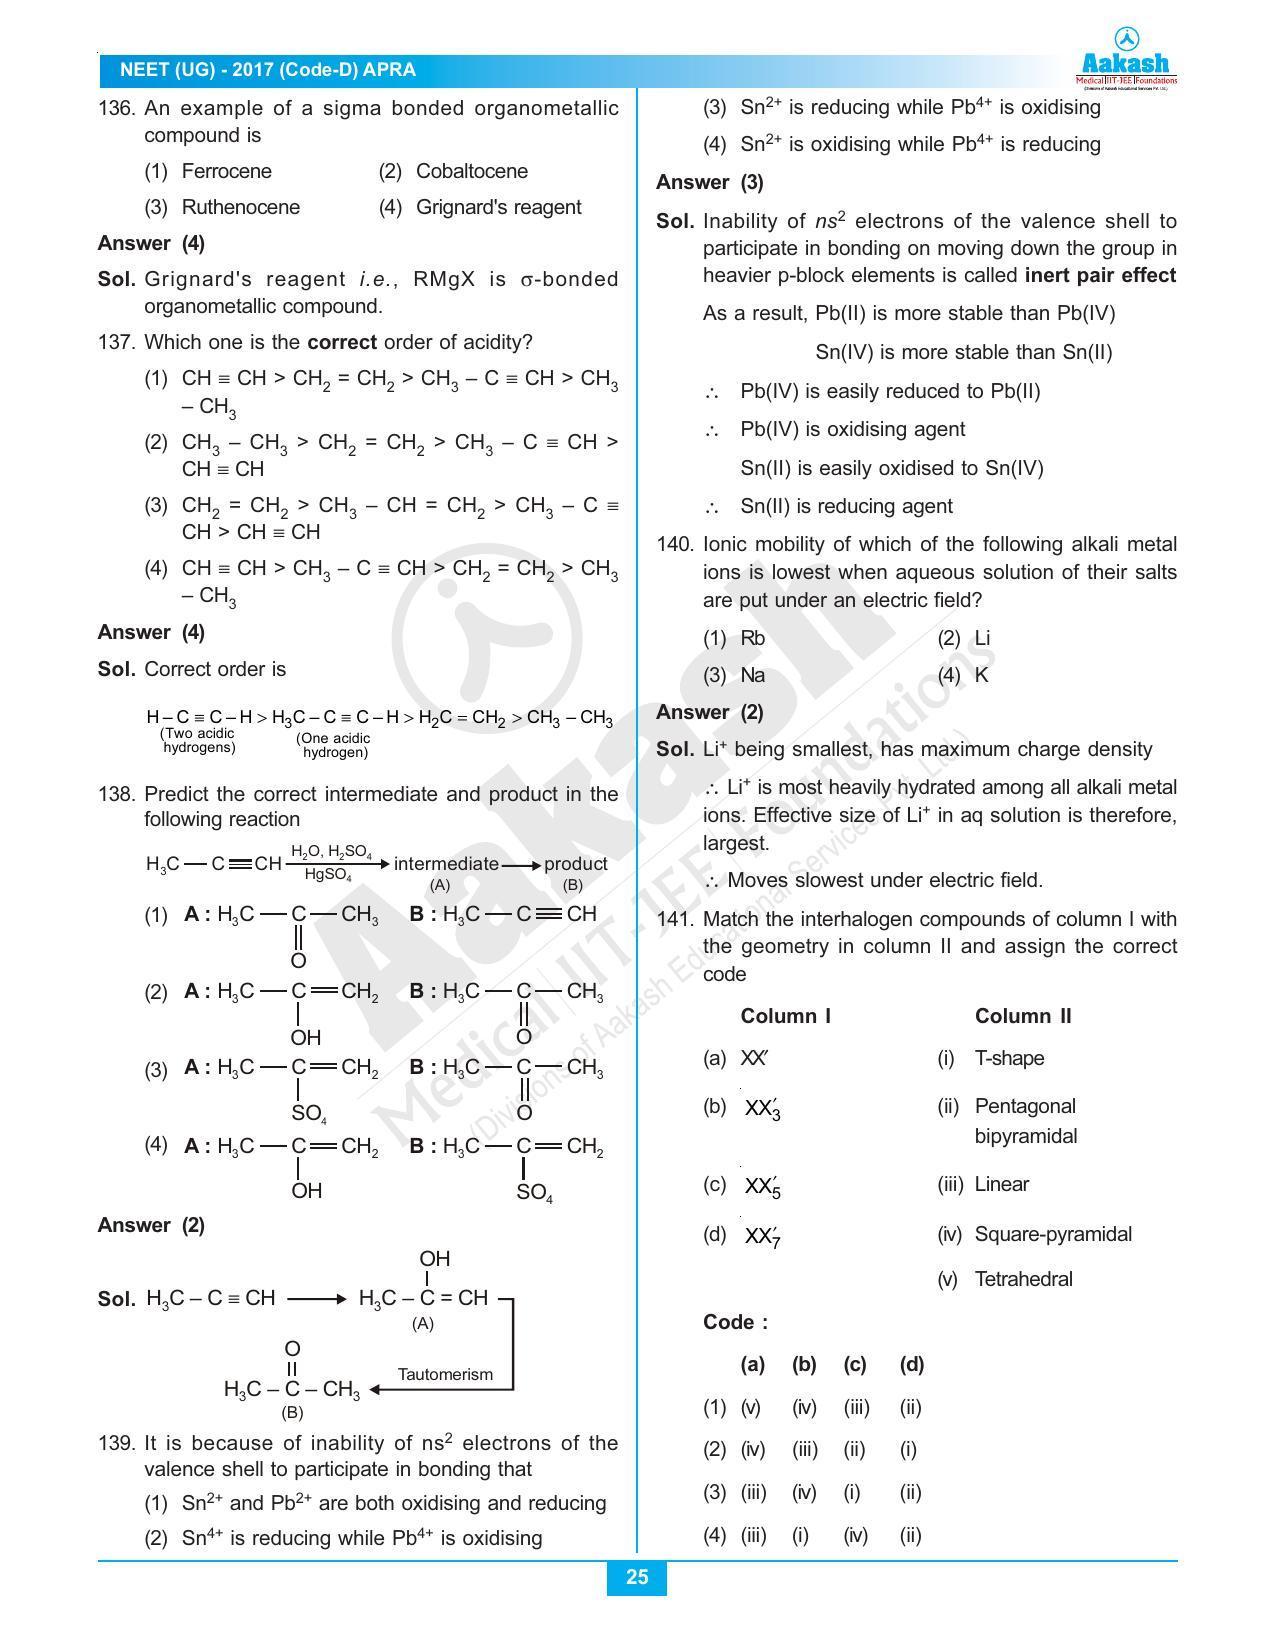  NEET Code D 2017 Answer & Solutions - Page 25